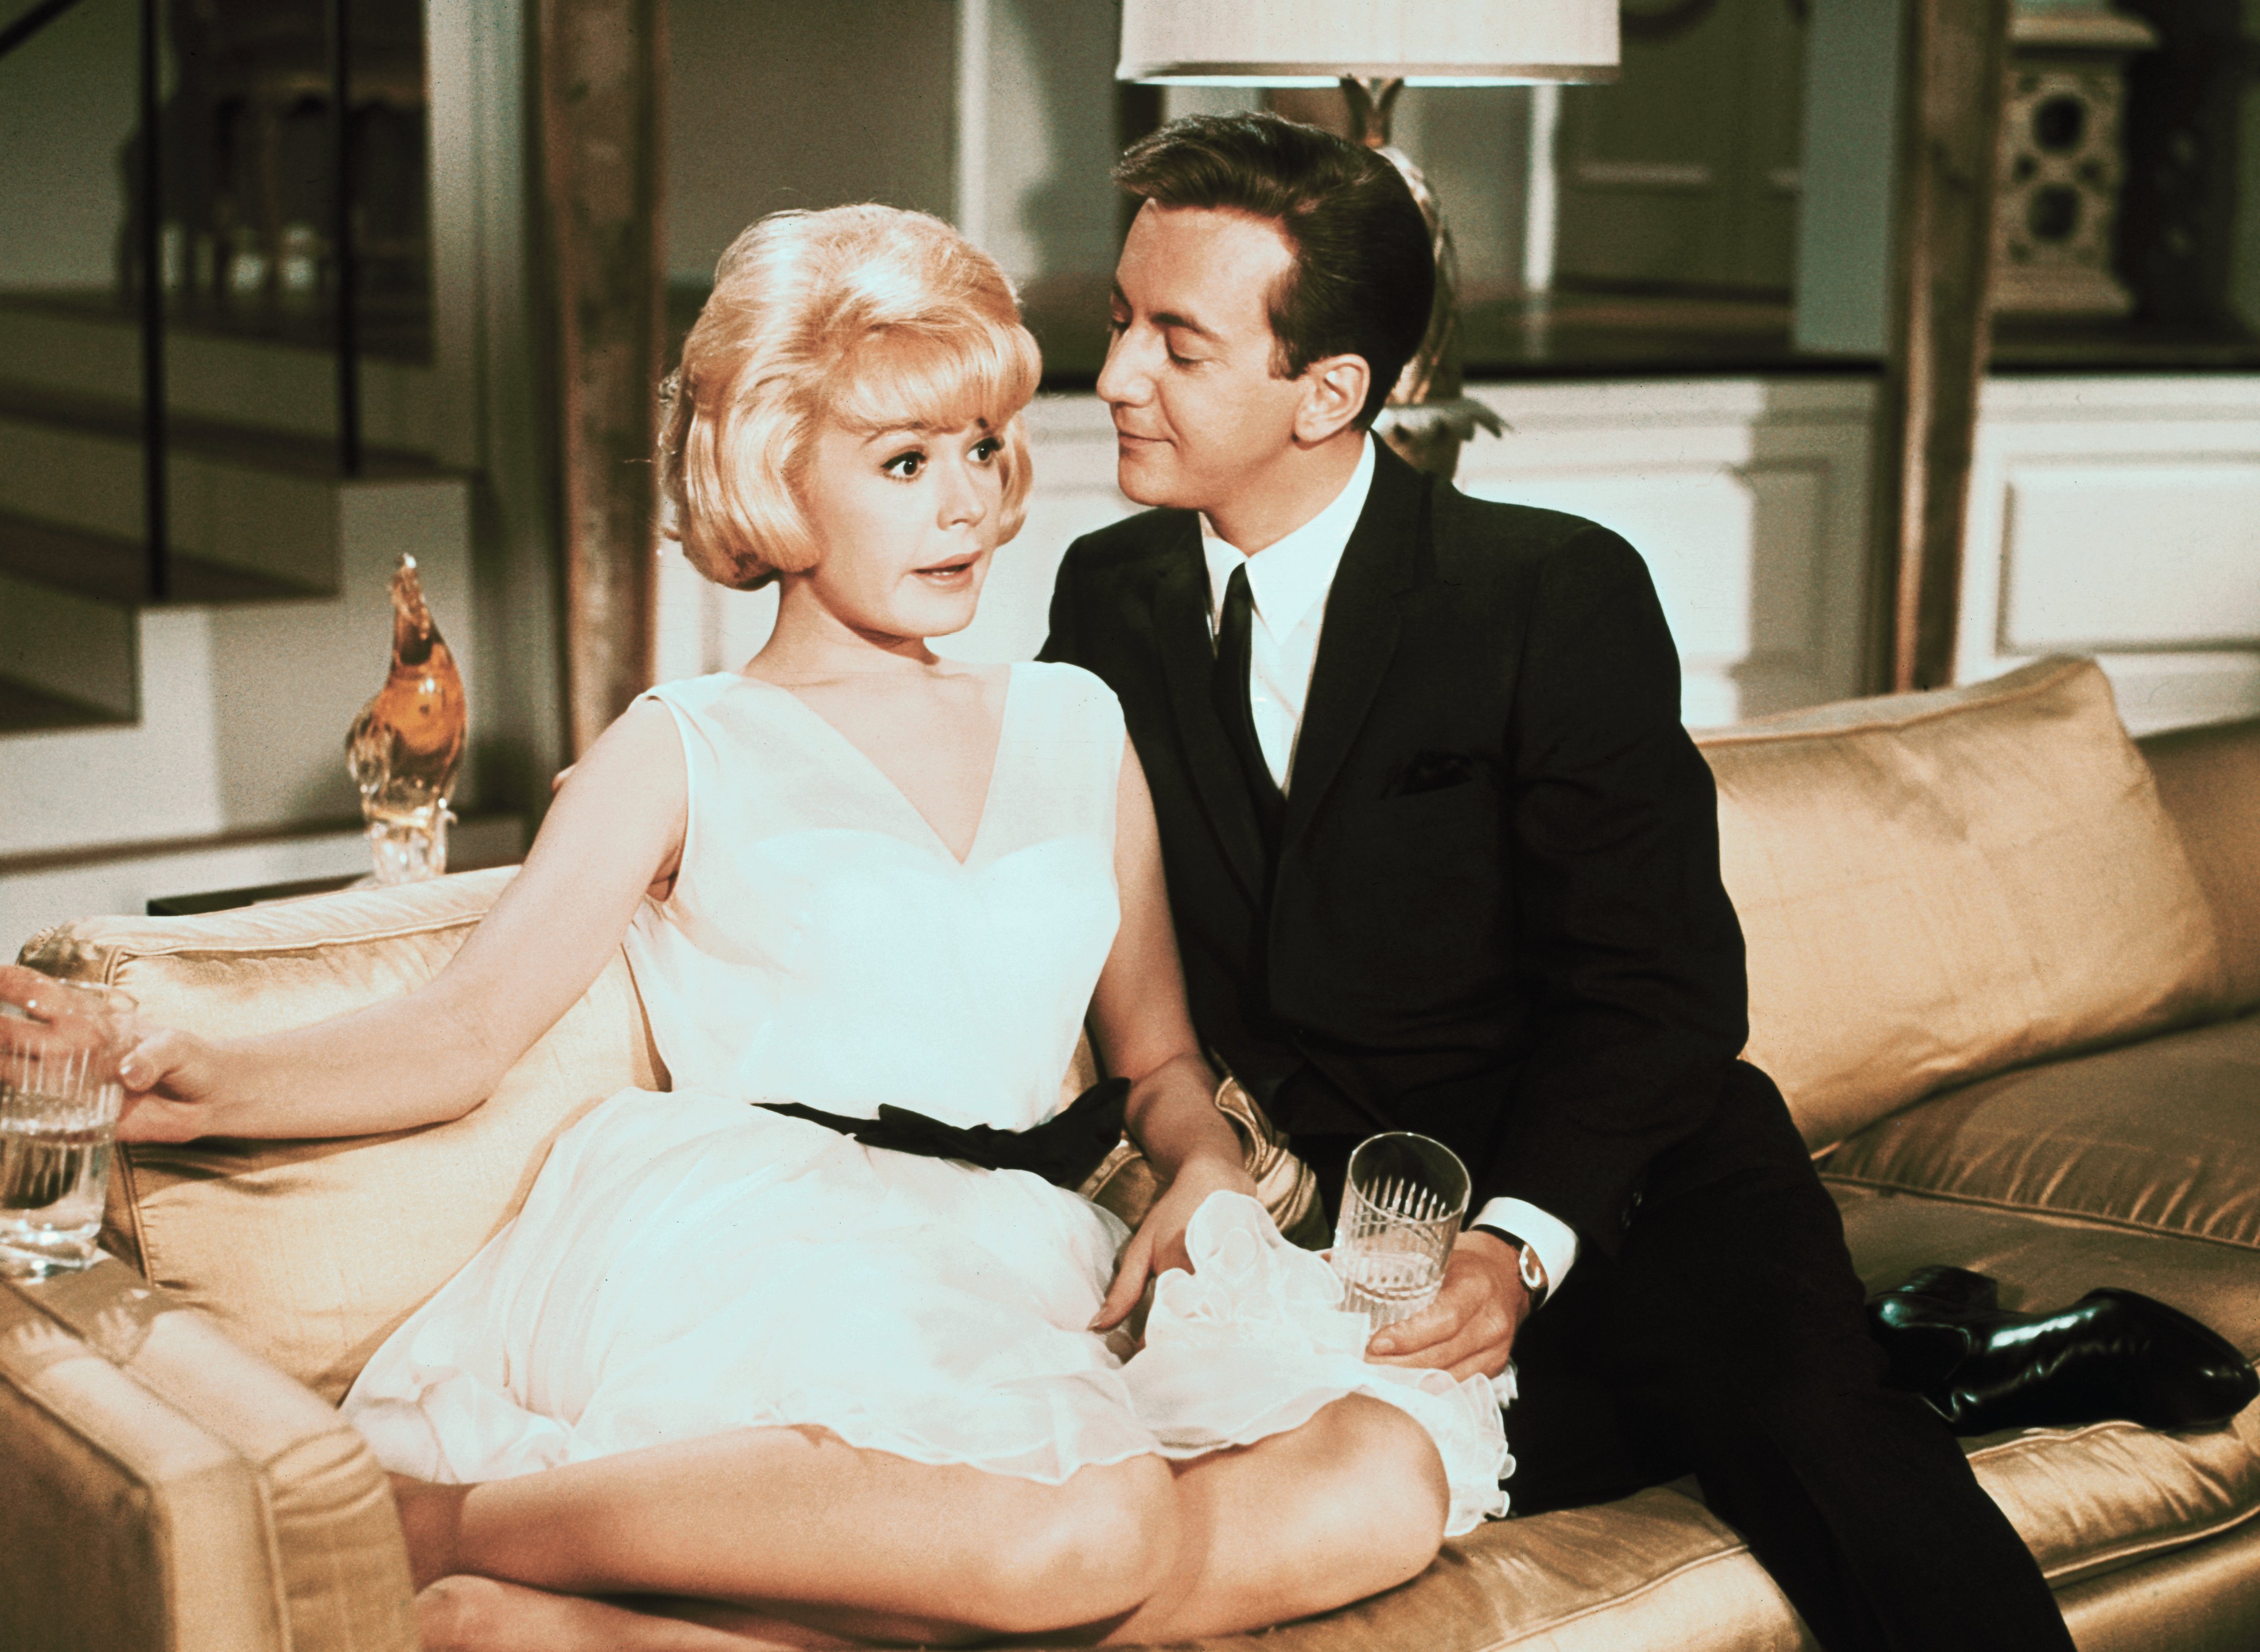 Sandra Dee and Bobby Darin in a scene from "That Funny Feeling" | Source: Getty Images